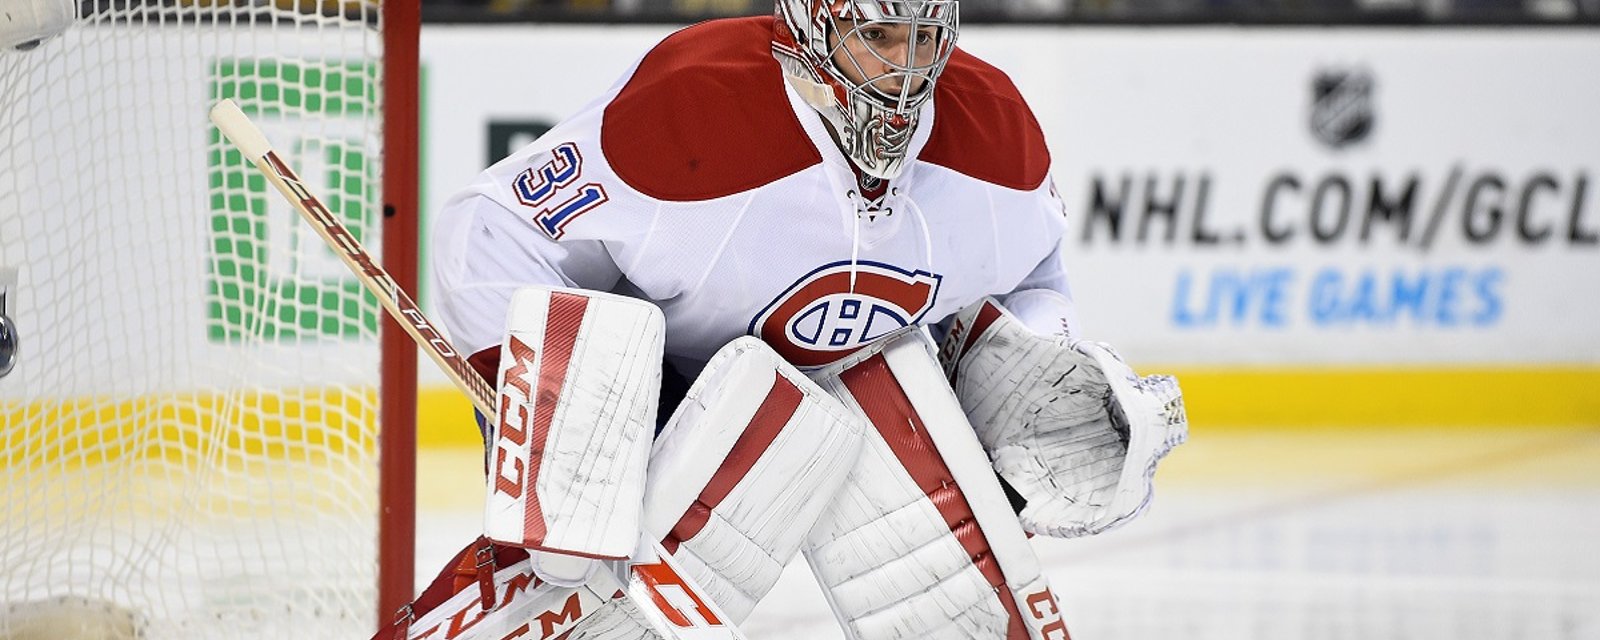 Breaking: Carey Price could be back in nets as early as this week.